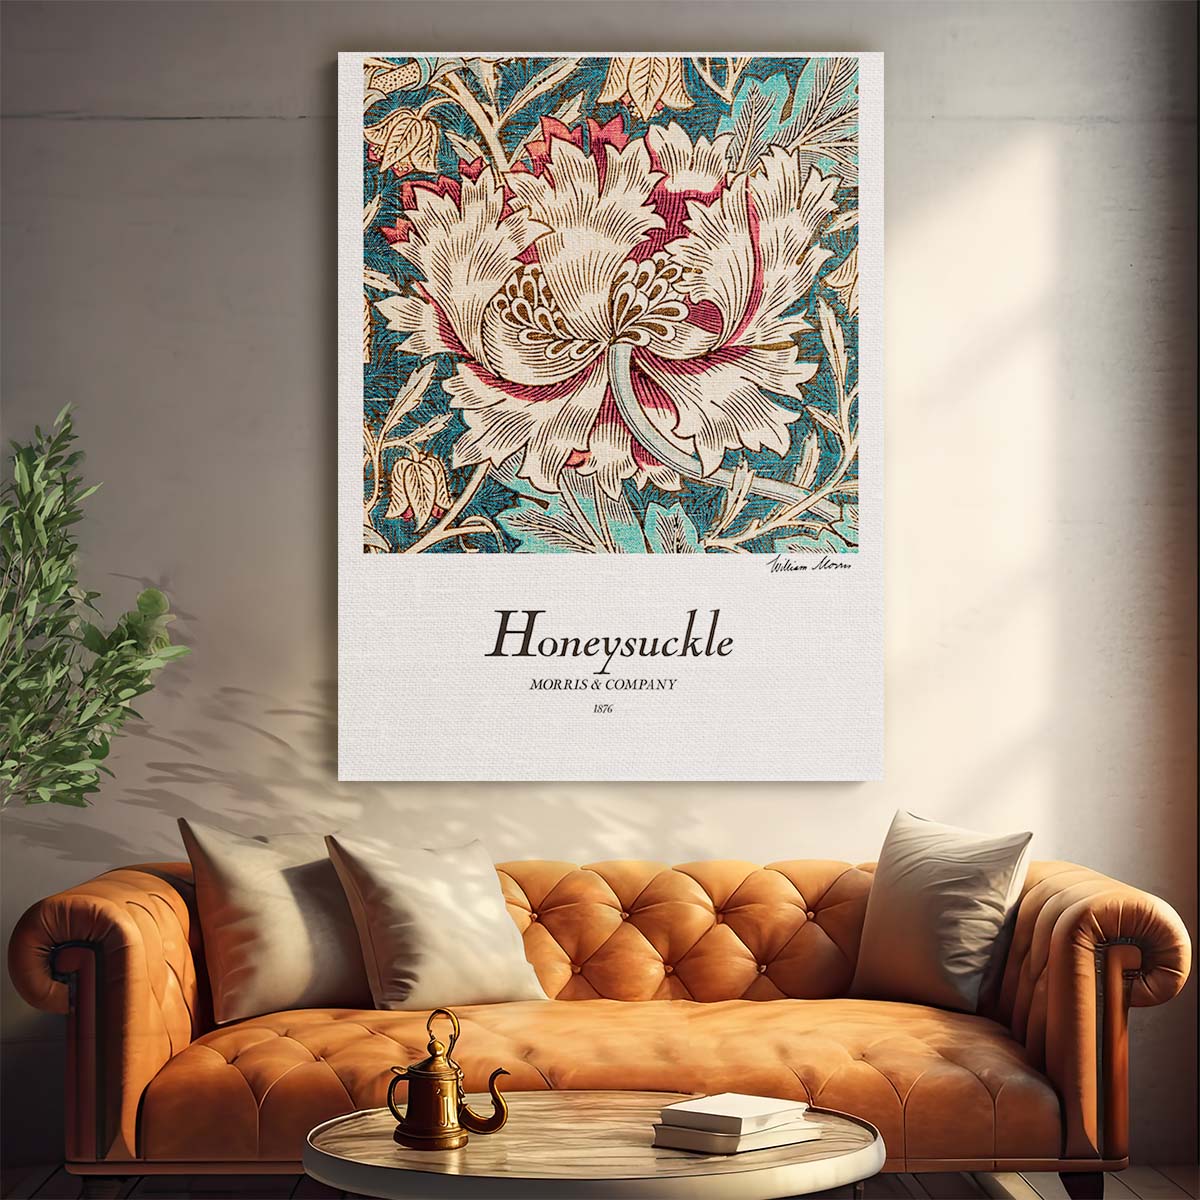 Vintage William Morris Honeysuckle Floral Illustration Wall Art Poster by Luxuriance Designs, made in USA